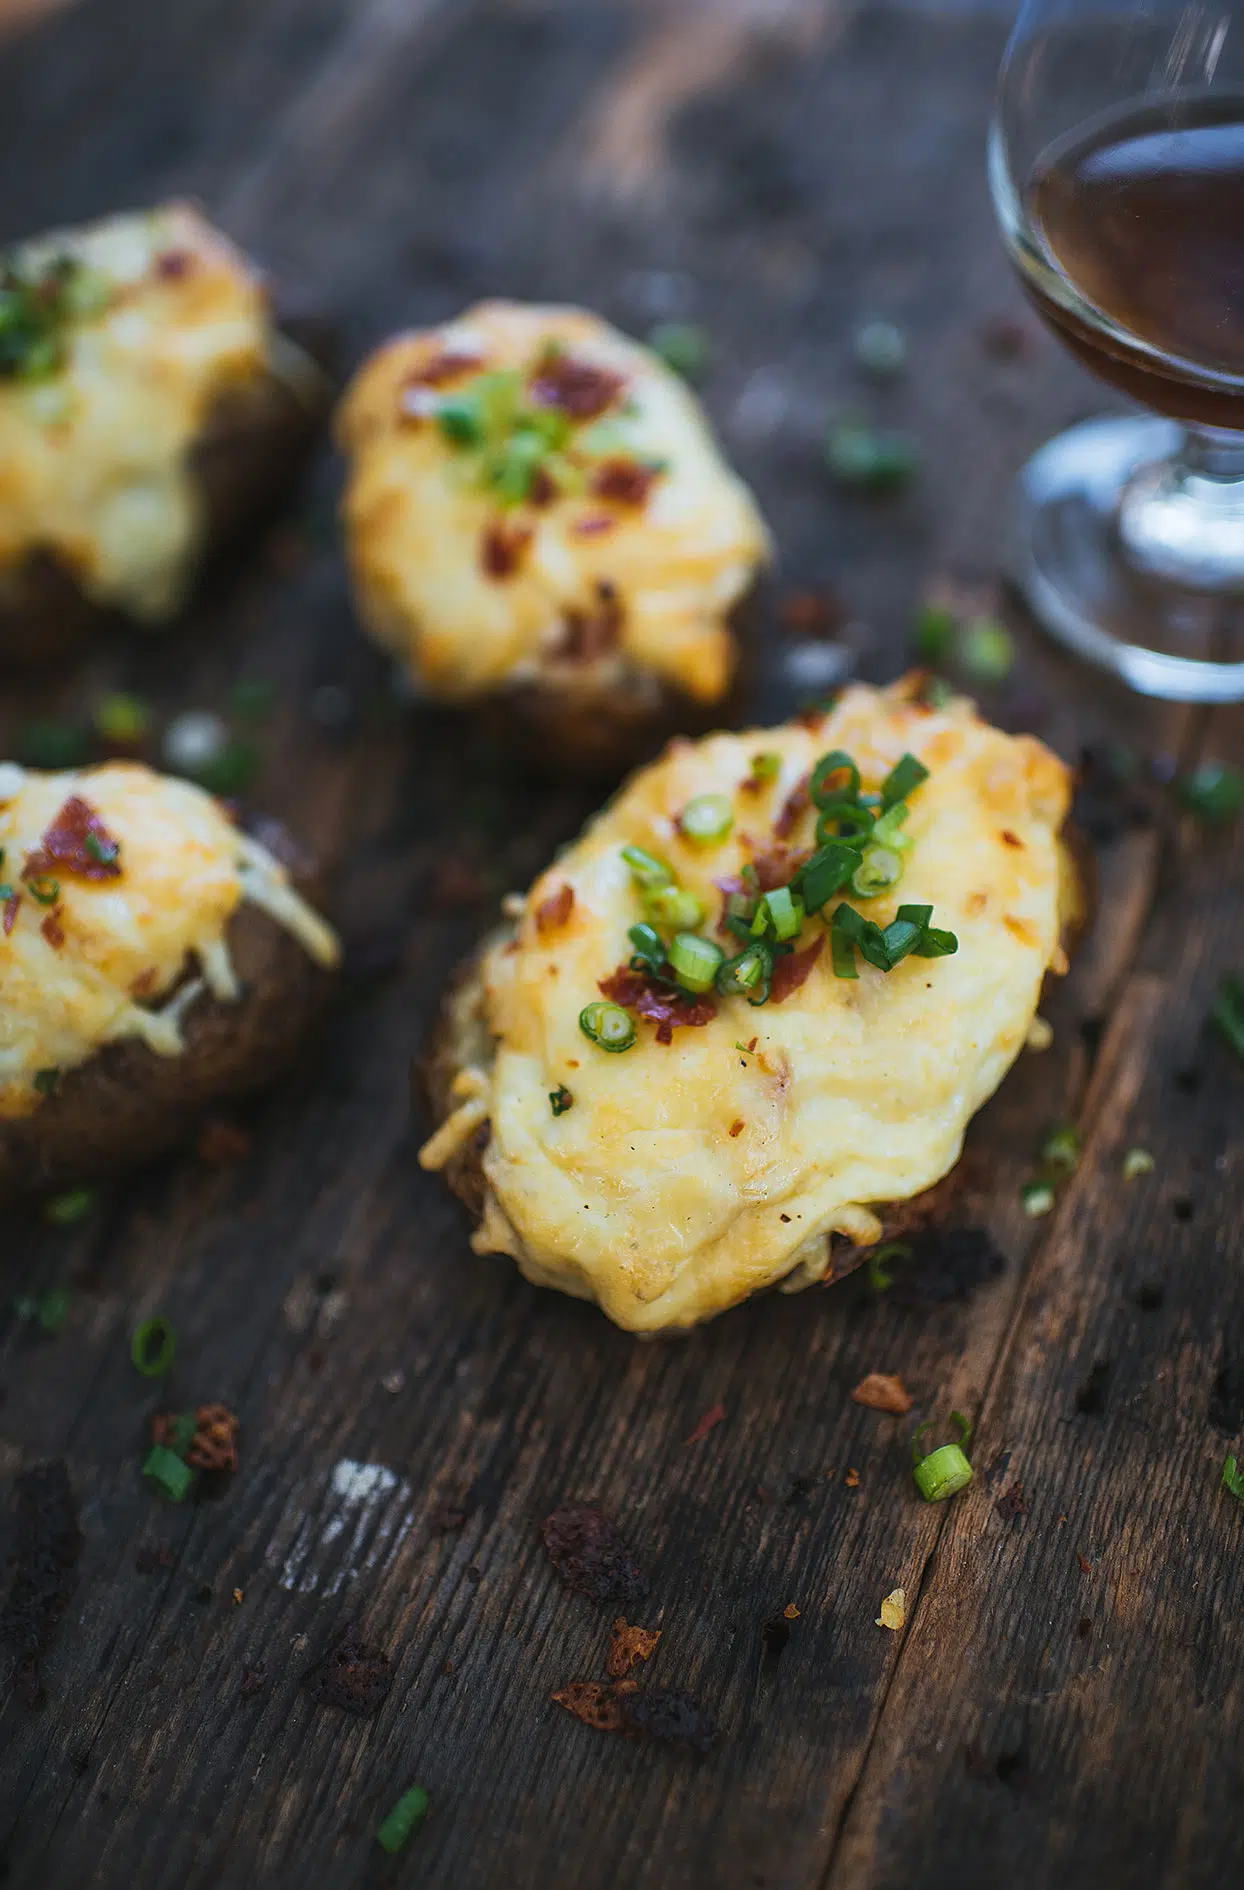 Smoked stuffed potatoes with sour cream, prosciutto, and cheese